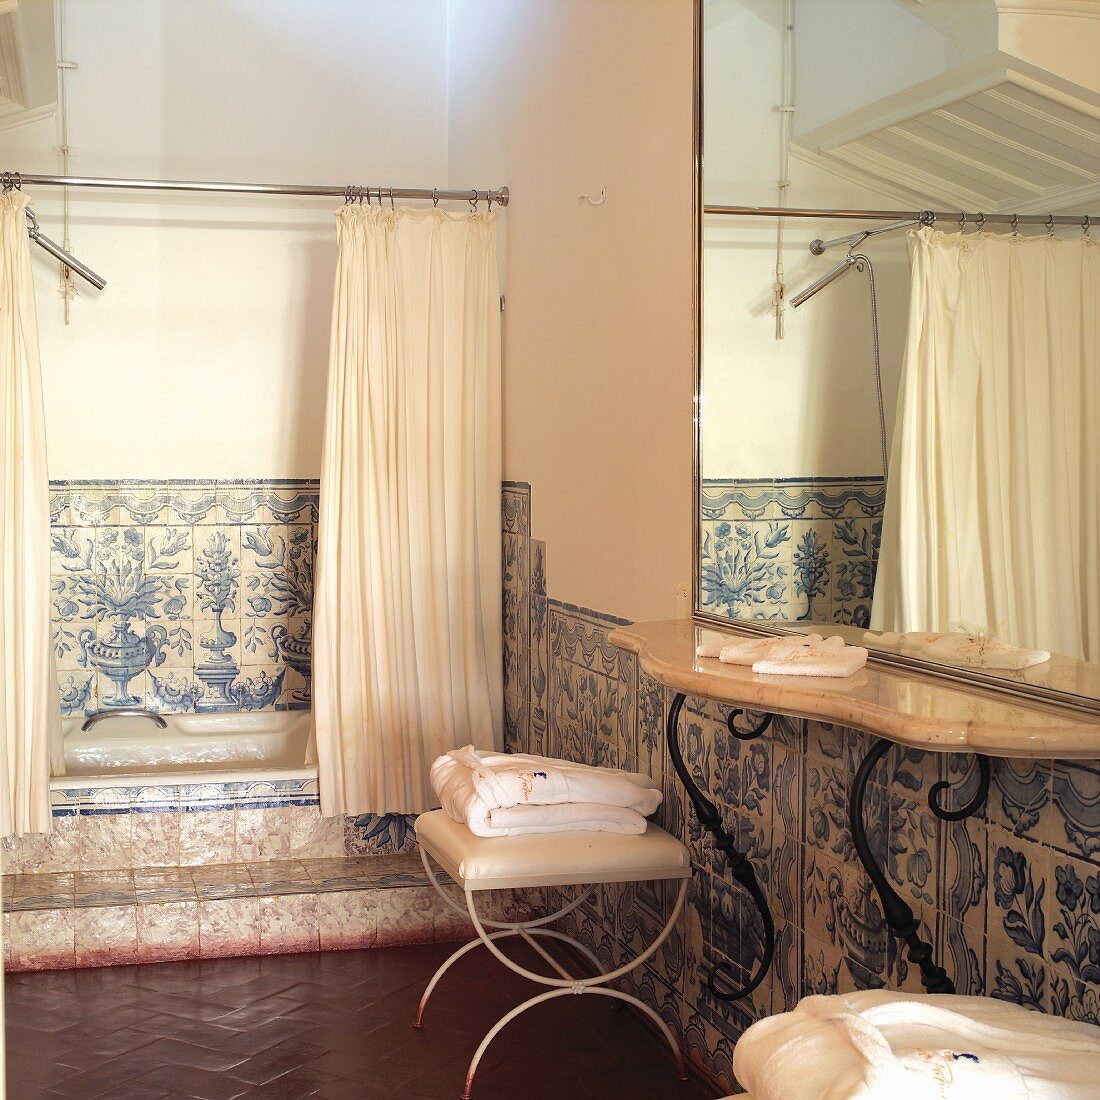 Vintage bathtub with traditional white and blue wall tiles and shower curtain in front of bathtub